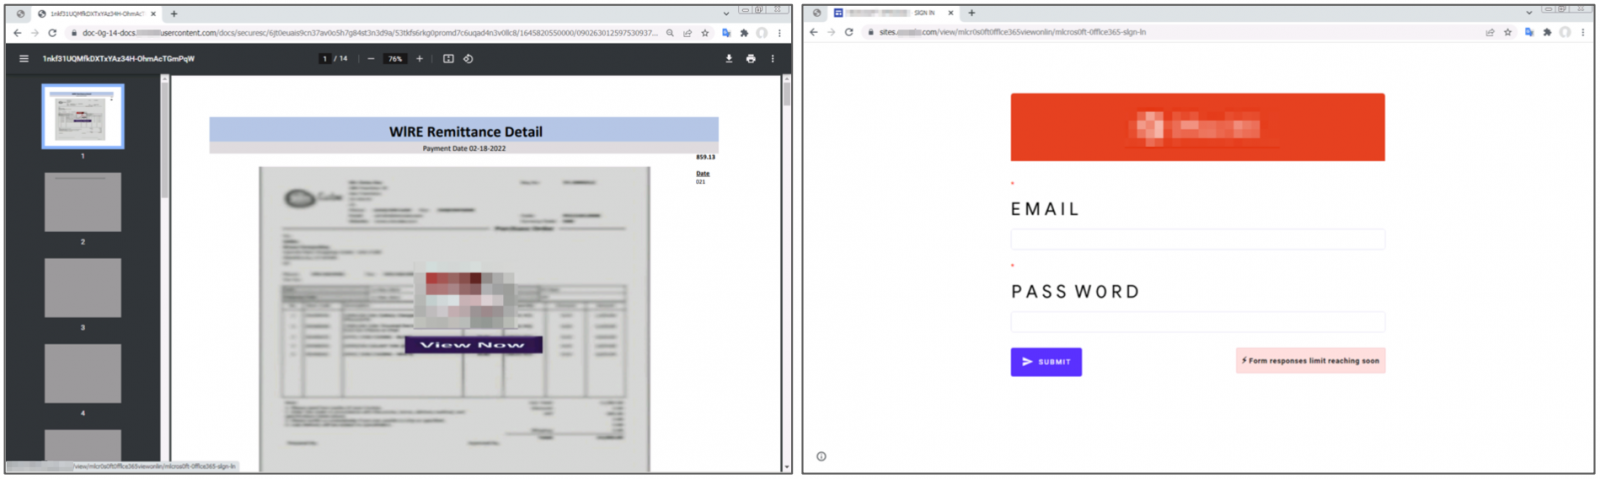 Loading a malicious document from a file hosting service (left), hosting a phishing site (right)